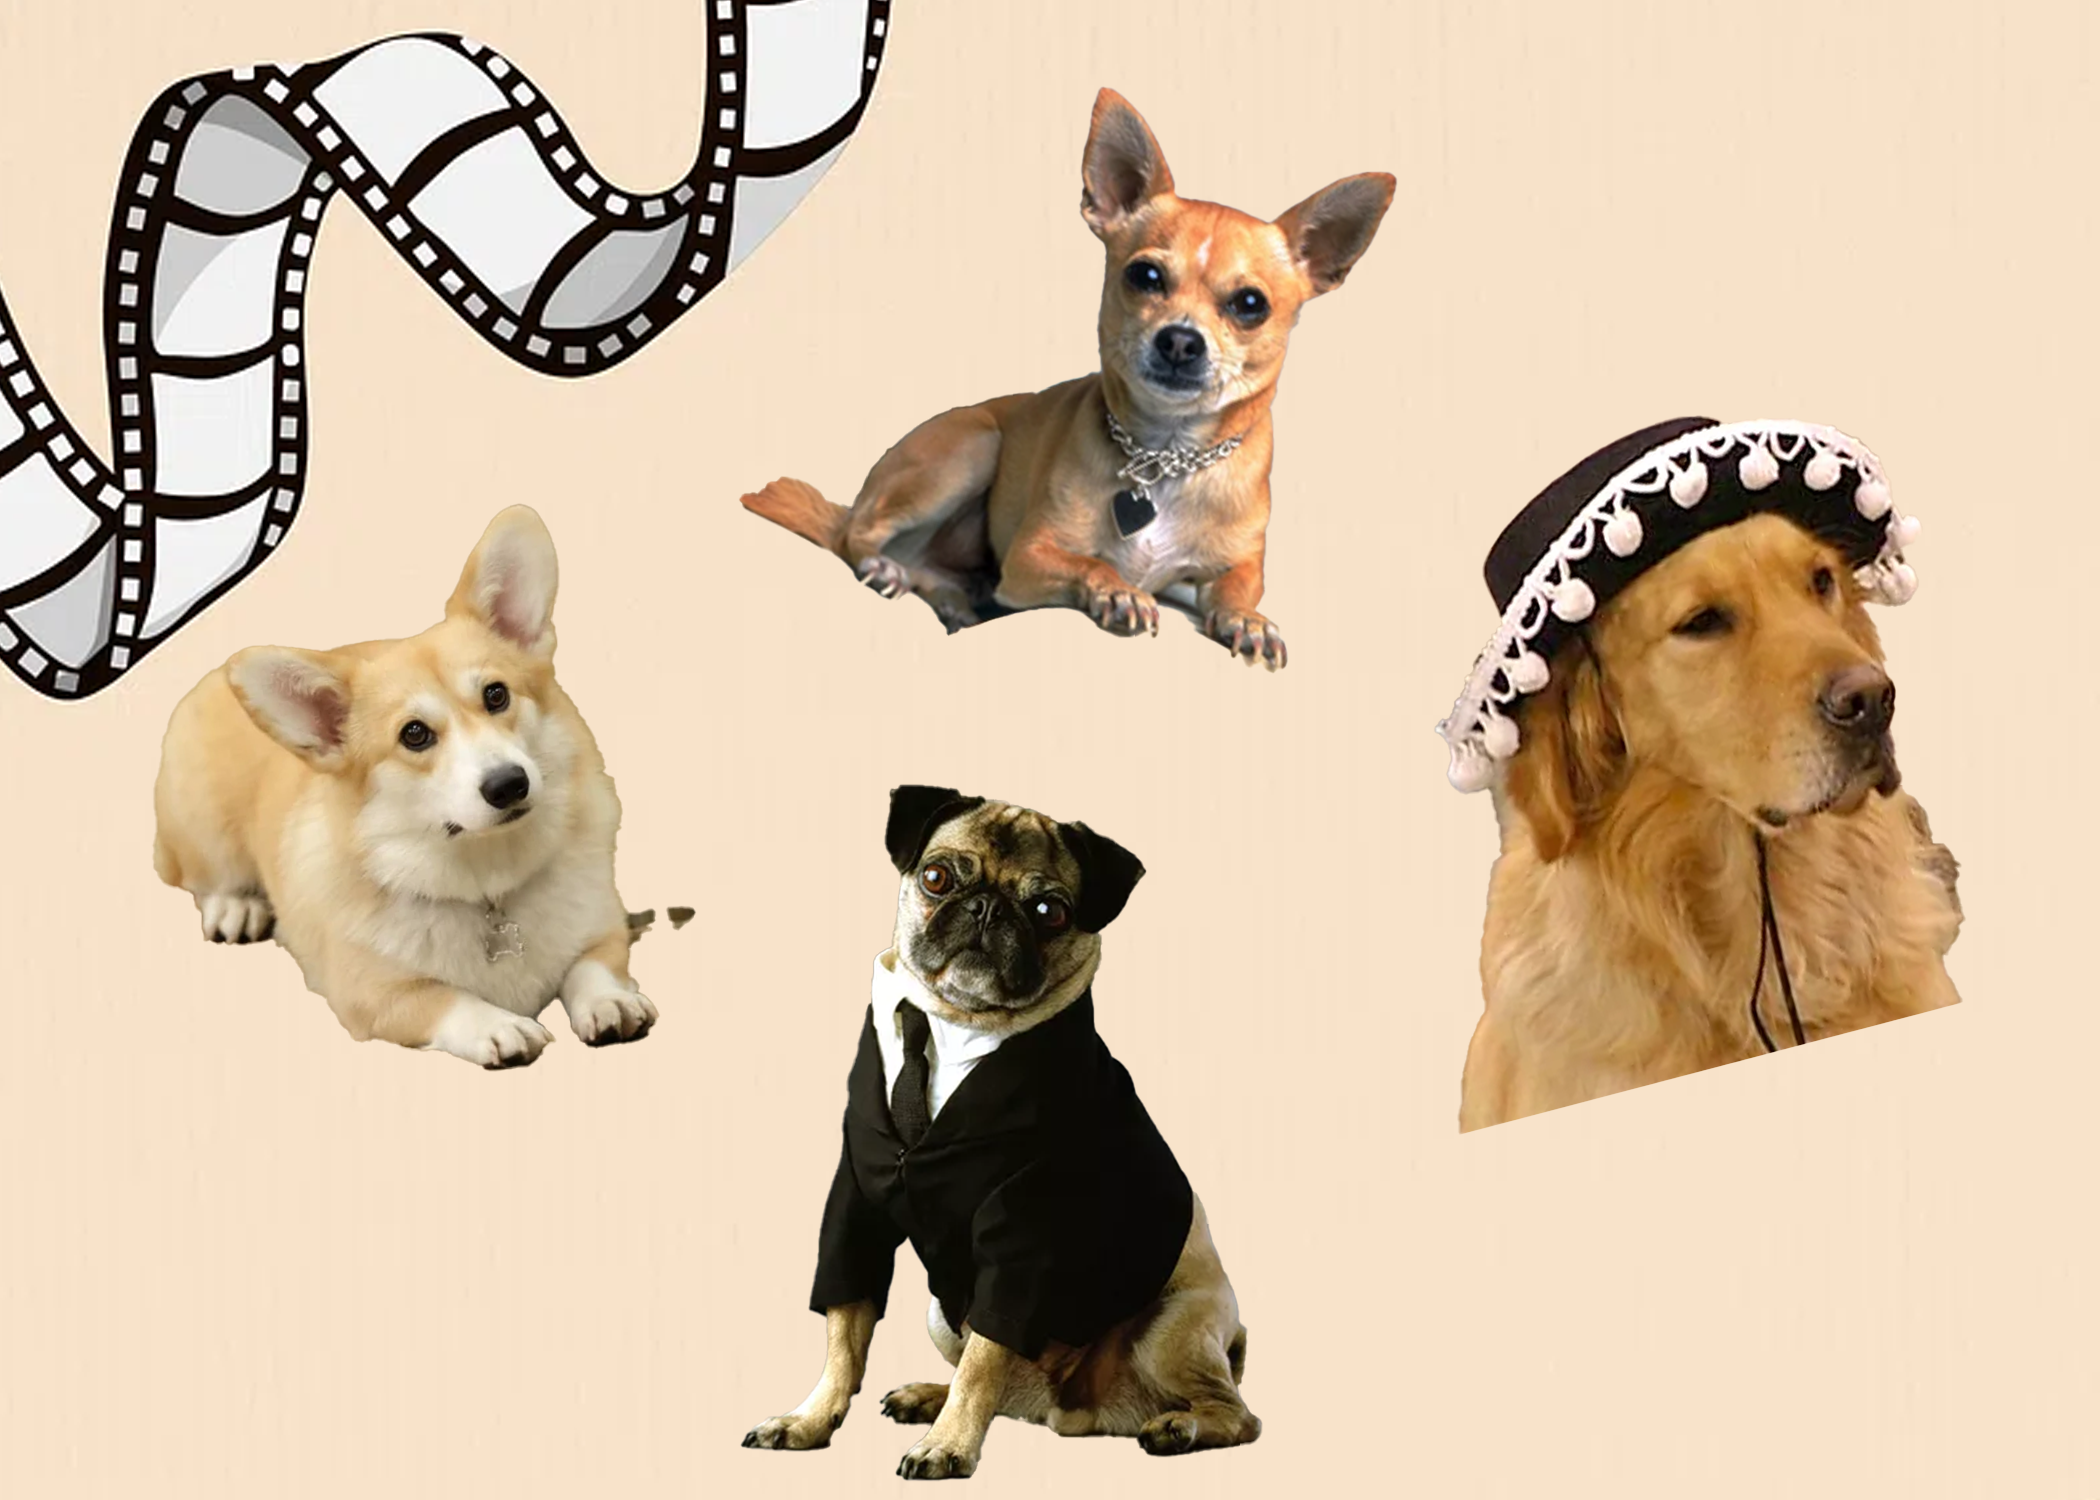 Quiz: Can You Identify These Movie and TV Dogs?